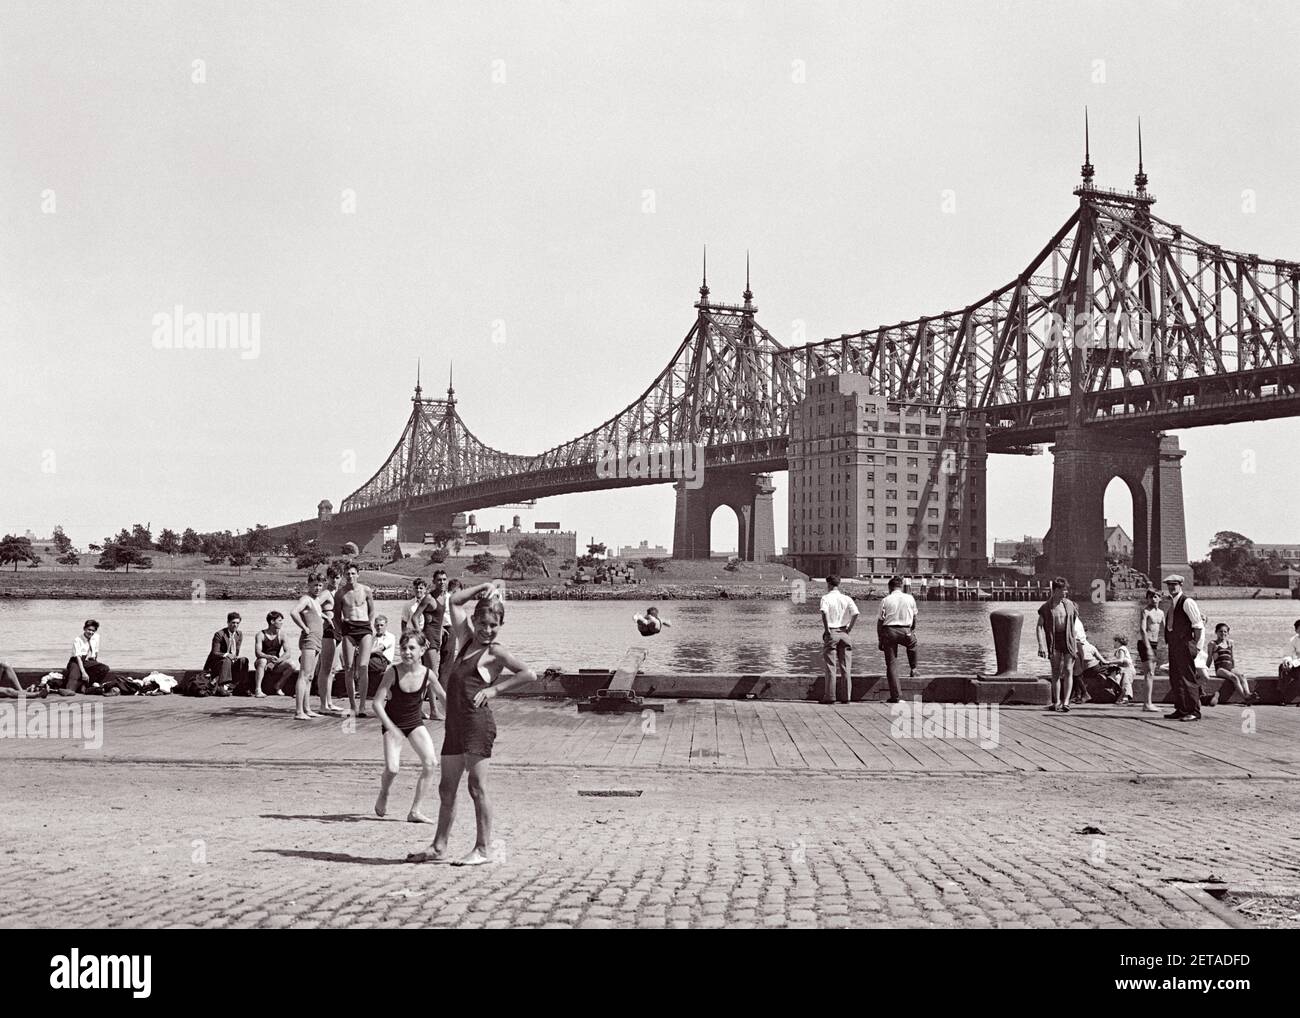 1920s THE OLD SWIMMING HOLE OF THE CITY STREET URCHIN QUEENSBORO BRIDGE EAST RIVER NEW YORK CITY USA - q2714 CPC001 HARS SWIM UNITED STATES COPY SPACE FULL-LENGTH PERSONS QUEENS UNITED STATES OF AMERICA MALES B&W NORTH AMERICA SUMMERTIME FREEDOM NORTH AMERICAN HAPPINESS LEISURE EXCITEMENT RECREATION OPPORTUNITY NYC SWIMMERS SWIMMING HOLE CONNECTION NEW YORK CITIES NEW YORK CITY URCHIN BOROUGH JUVENILES QUEENSBORO SEASON SPAN BLACK AND WHITE BRIDGES EAST RIVER JOIN OLD FASHIONED Stock Photo